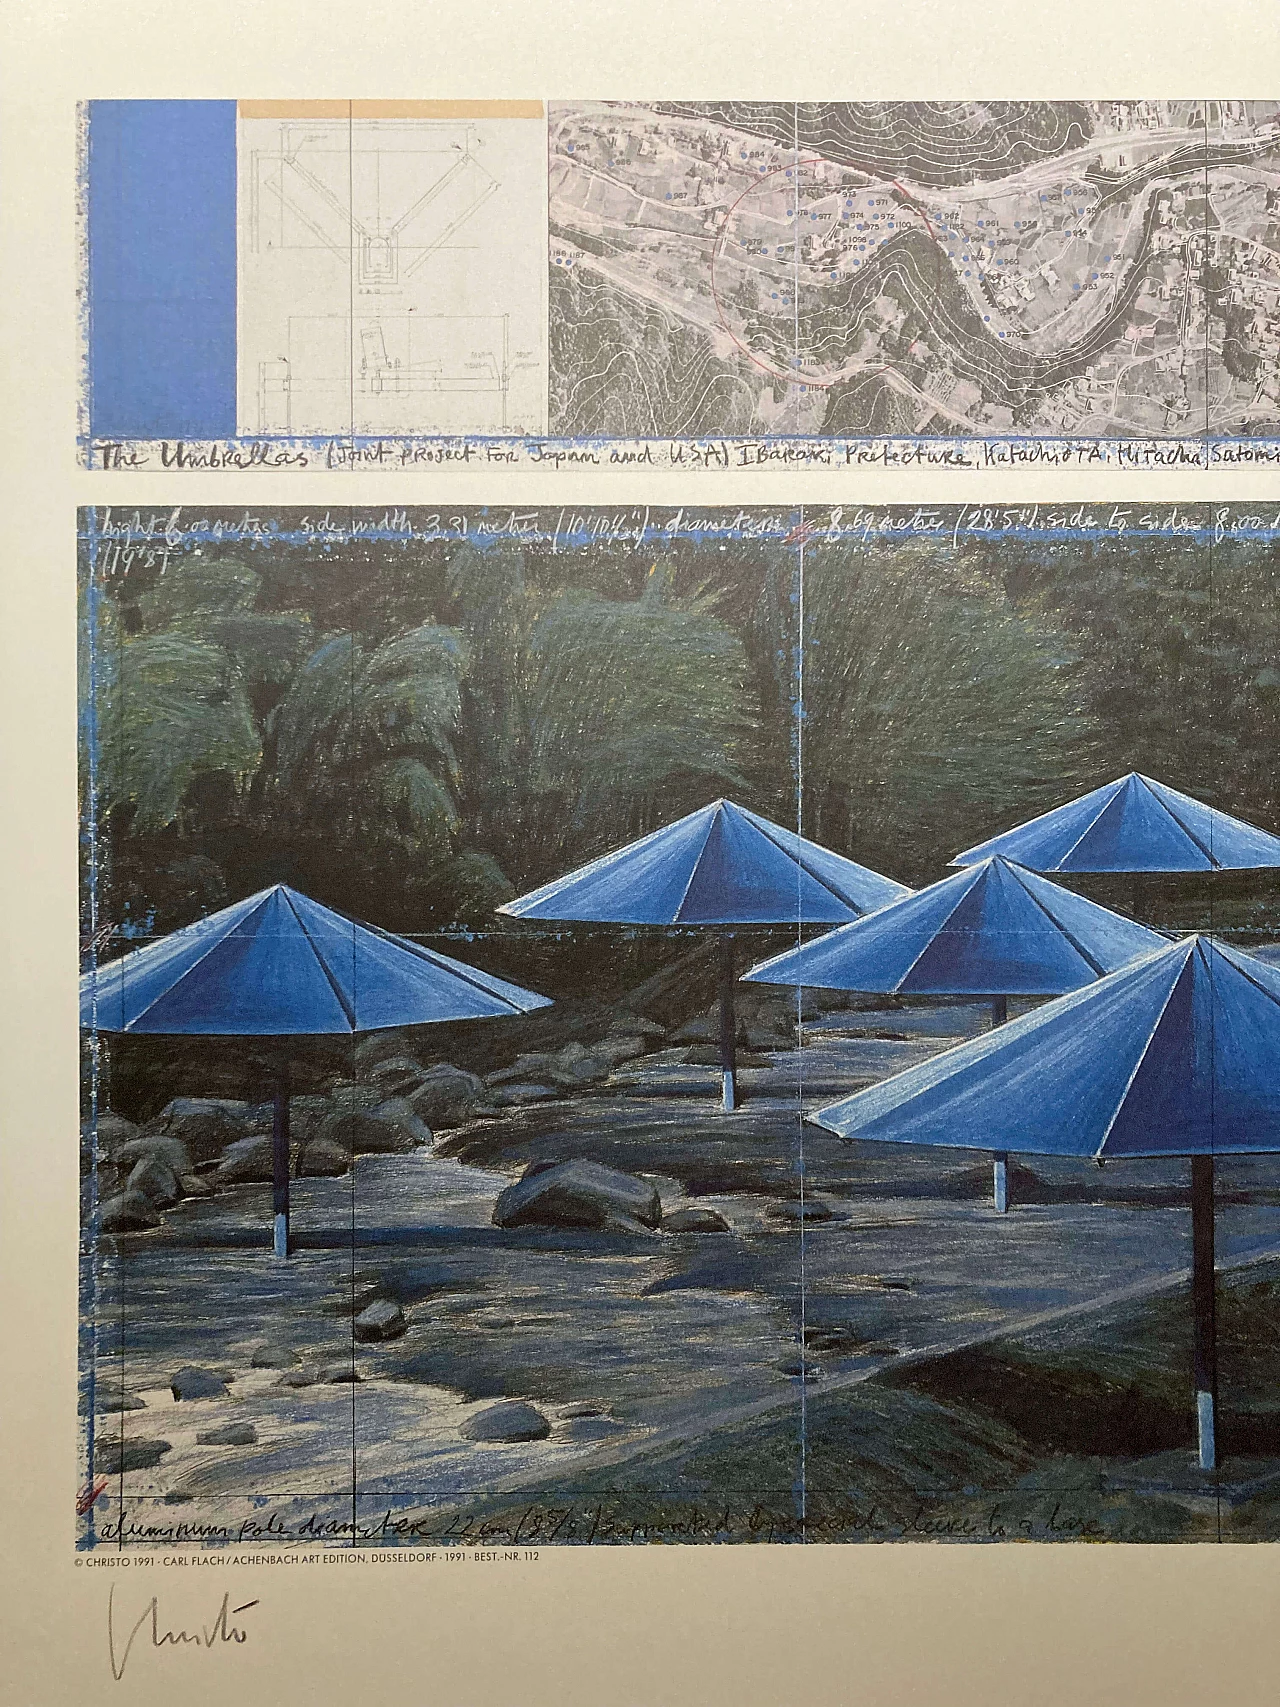 Christo, The Umbrellas - Joint Project for Japan and USA, lithograph, 1991 6